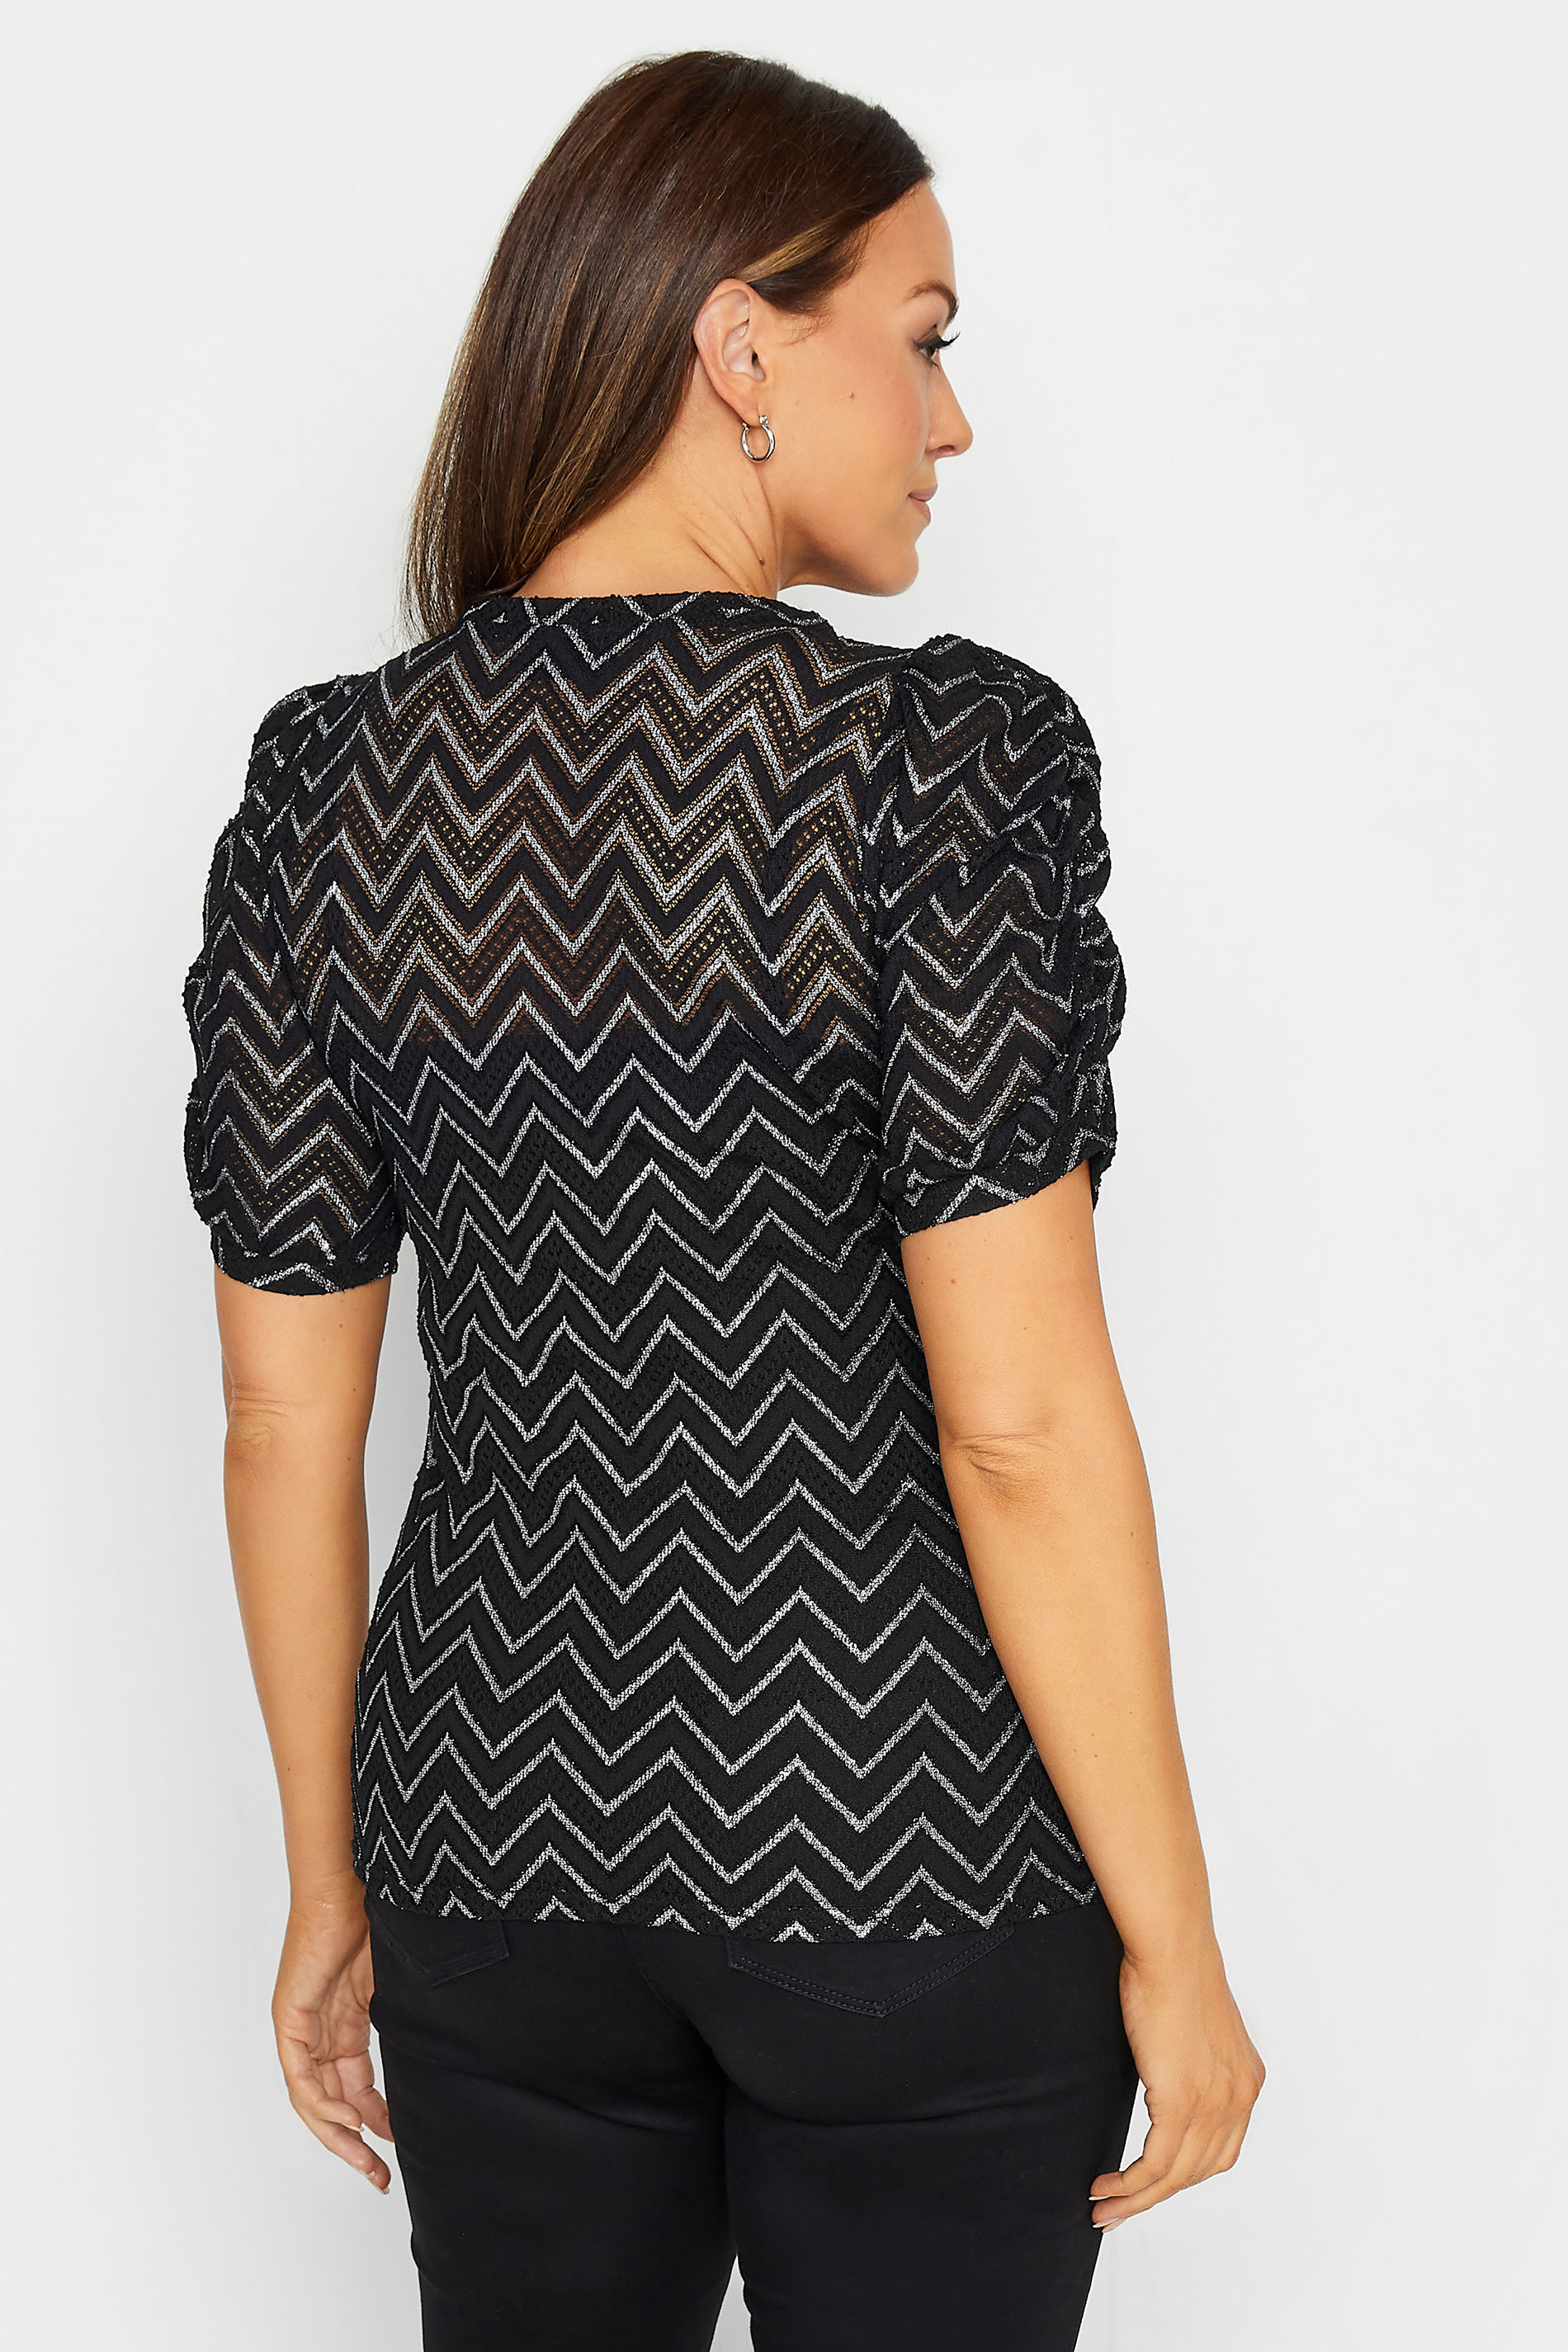 M&Co Black & Silver Glitter Chevron Ruched Sleeve Blouse | M&Co 3